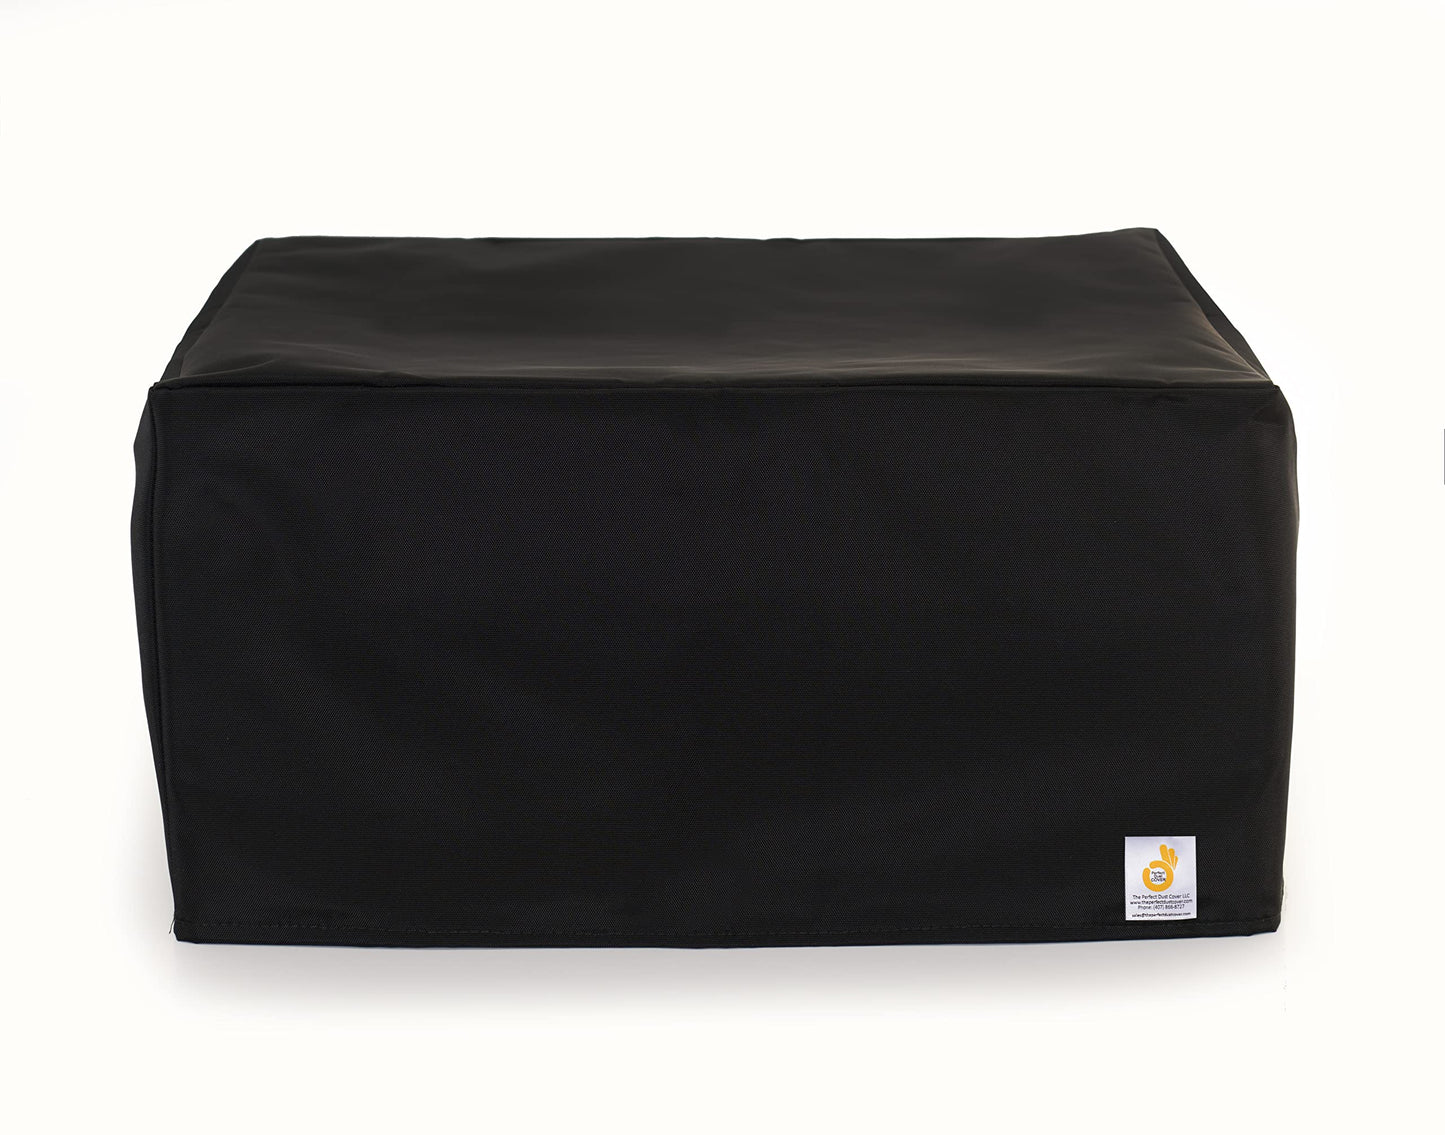 The Perfect Dust Cover, Black Nylon Cover Compatible with HP OfficeJet Pro 8020, HP OfficeJet Pro 8022, HP OfficeJet Pro 8025 and HP OfficeJet Pro 8028 Printers, Anti Static and Double Stitched Cover